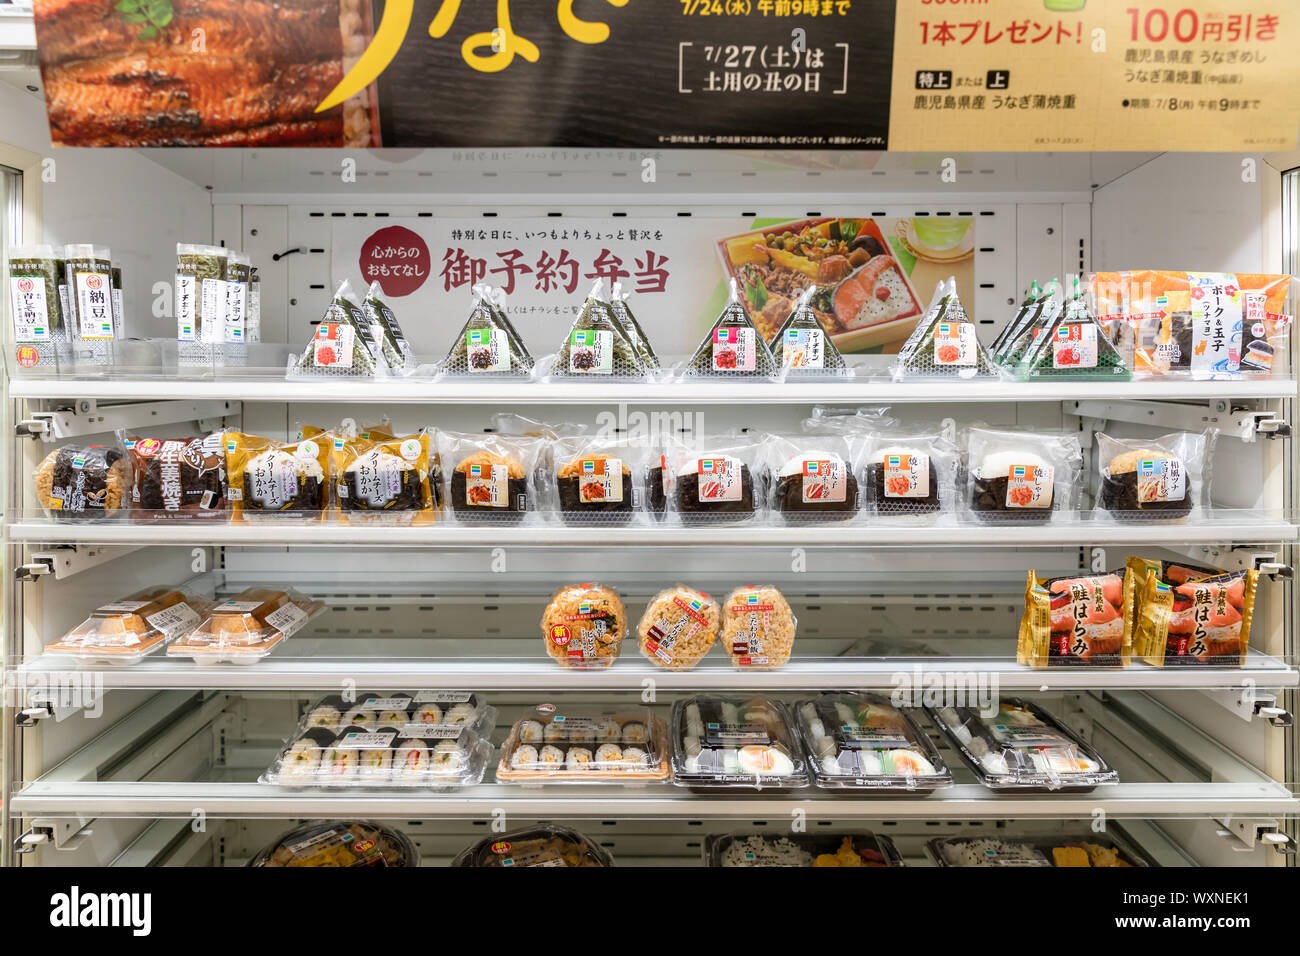 Onigiri rice balls on refrigerator shelves in a Japanese convenience store Stock Photo